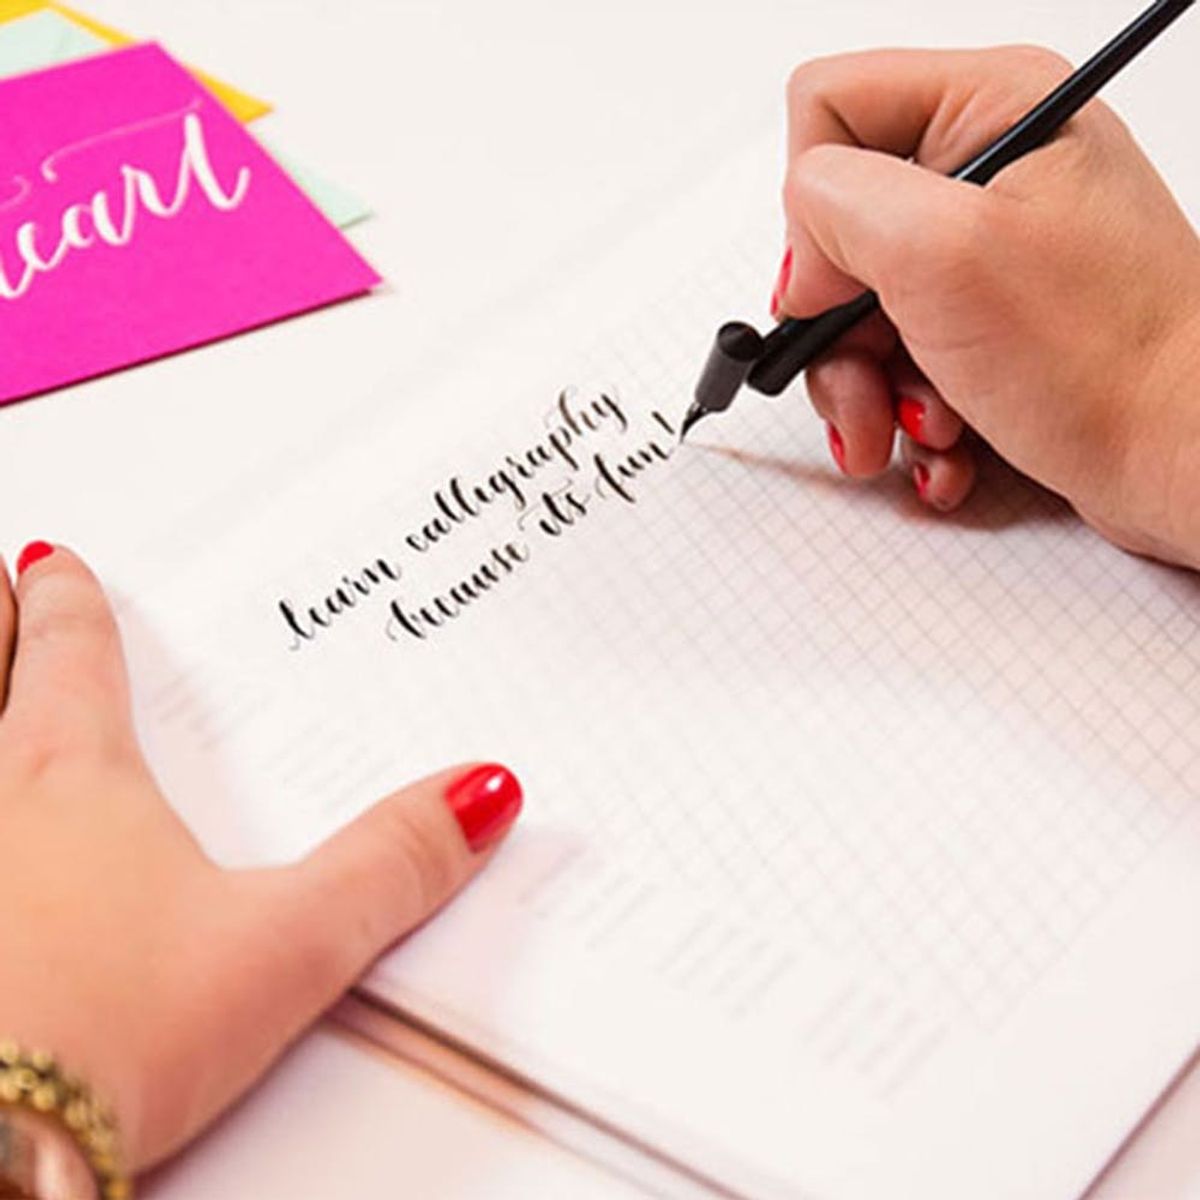 This Online Class Will Transform You Into a Calligraphy Pro